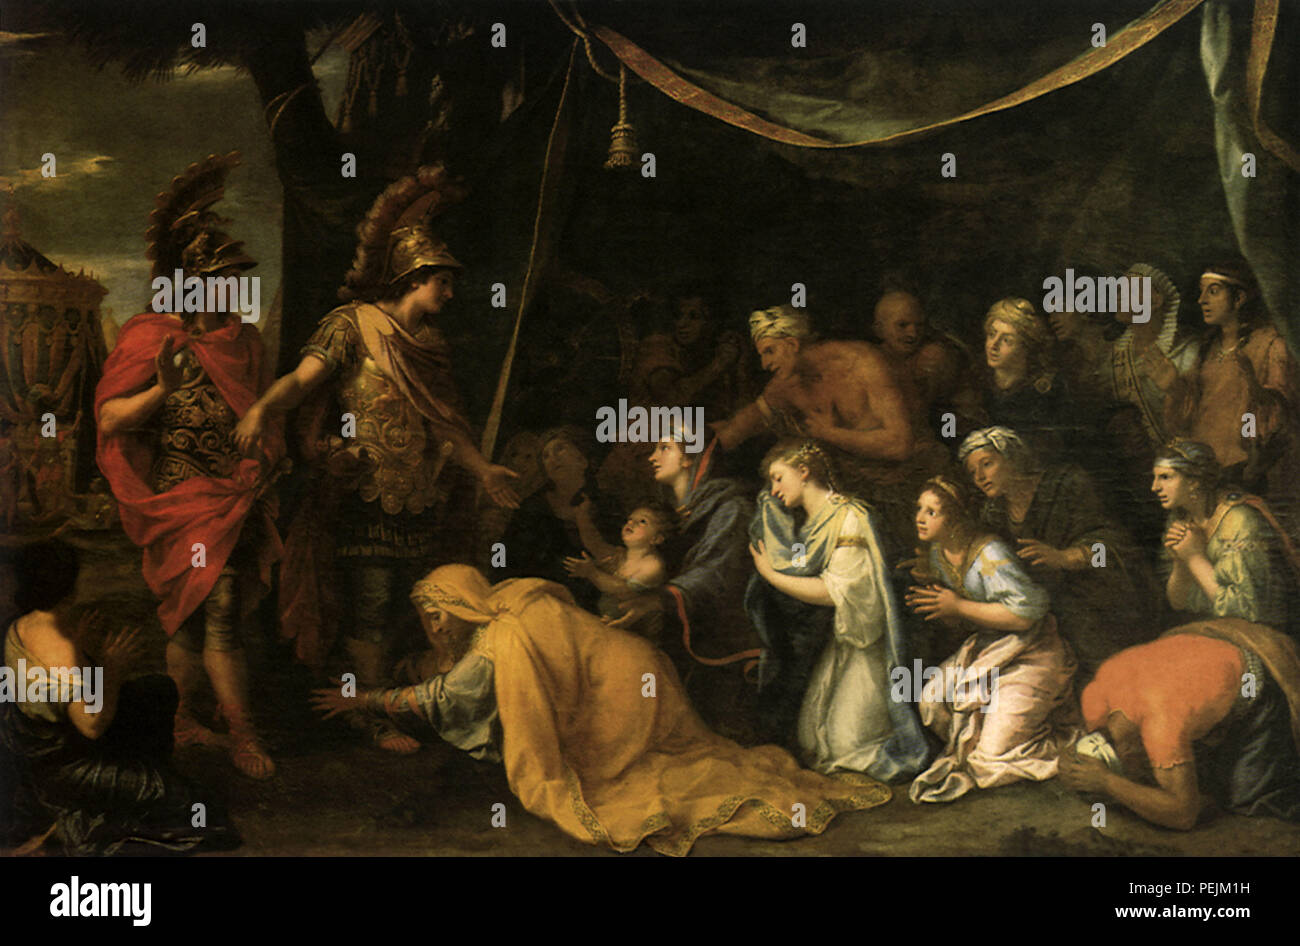 Alexander Shows Mercy 1660, Le Brun, Charles Stock Photo